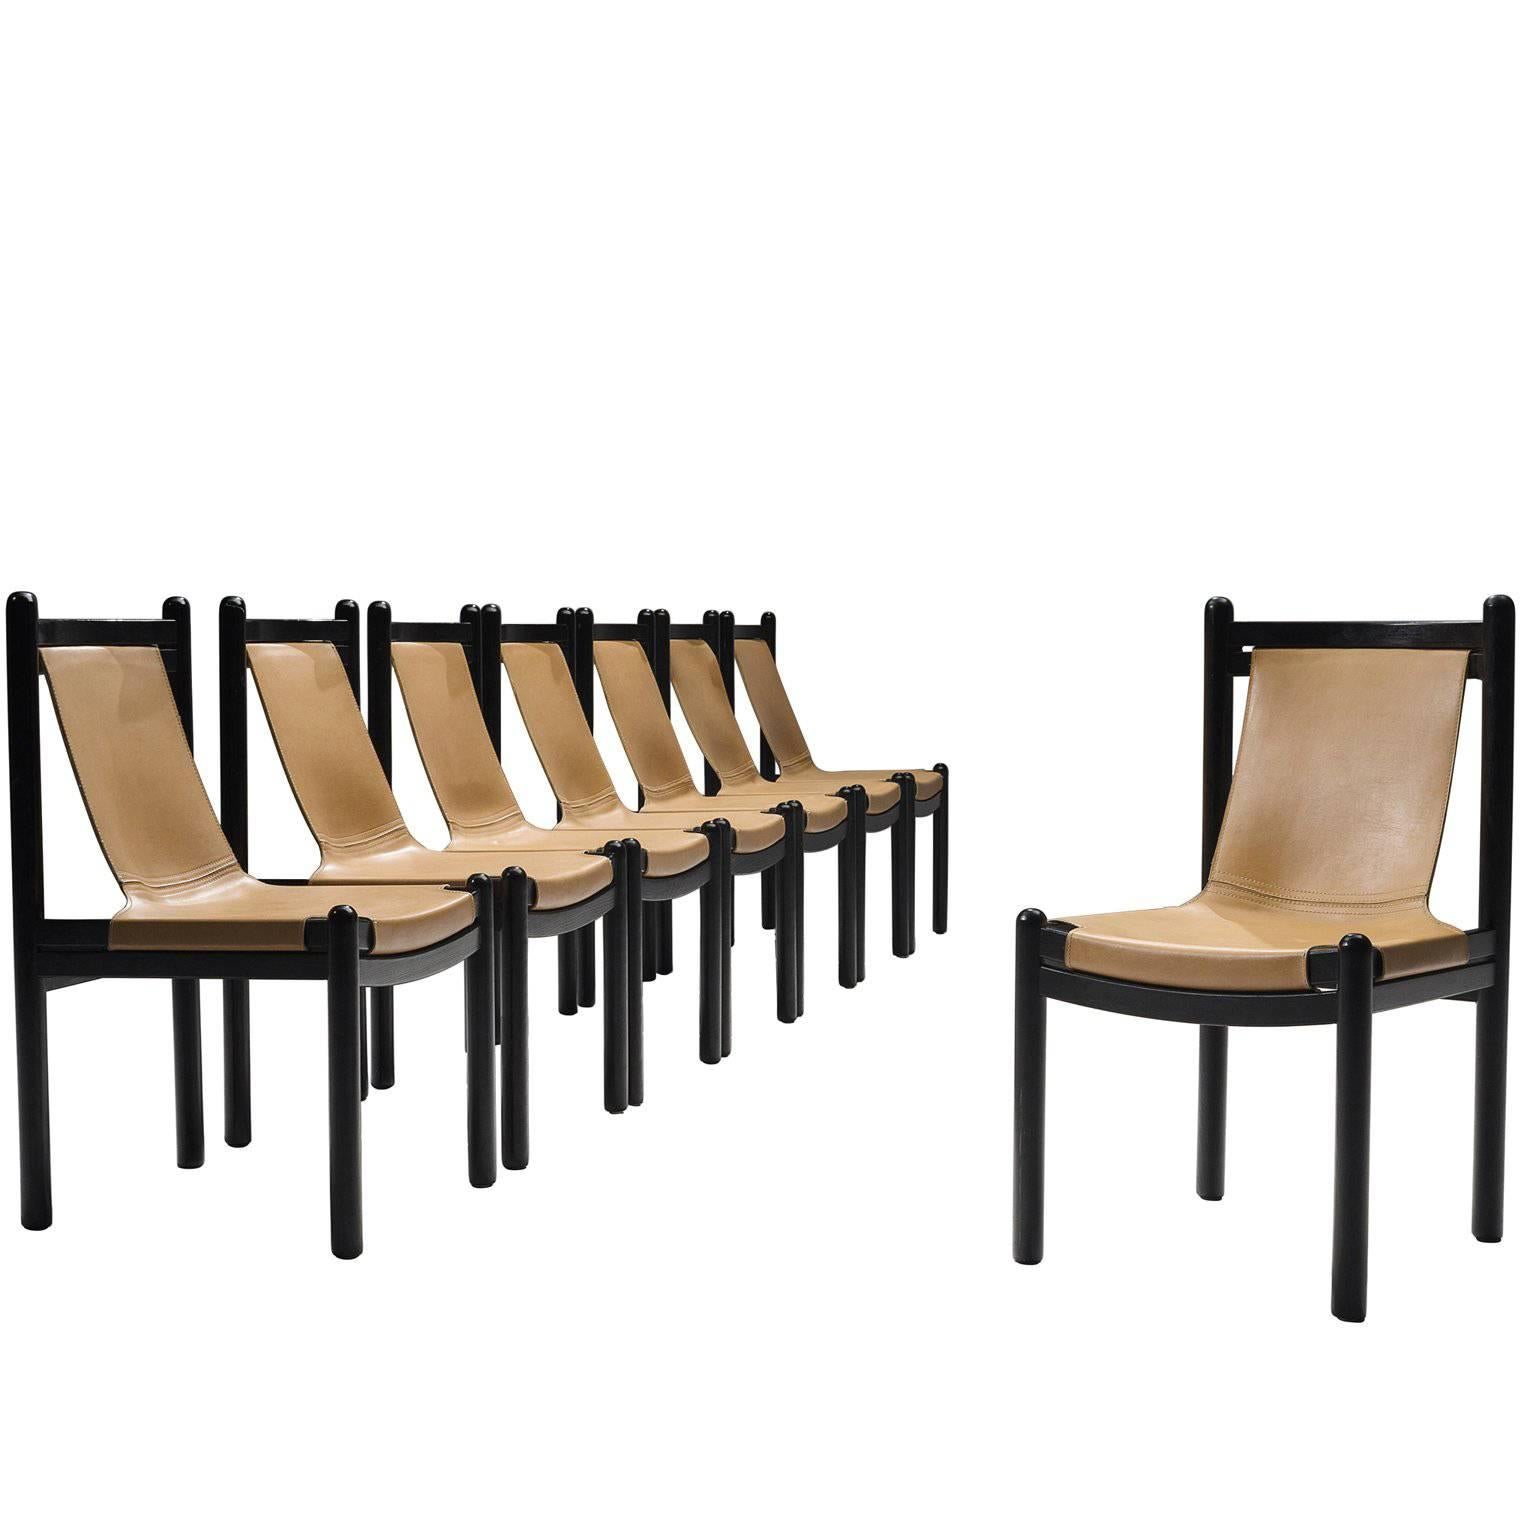 Set of Eight Wood and Leather Dining Chairs, 1950s